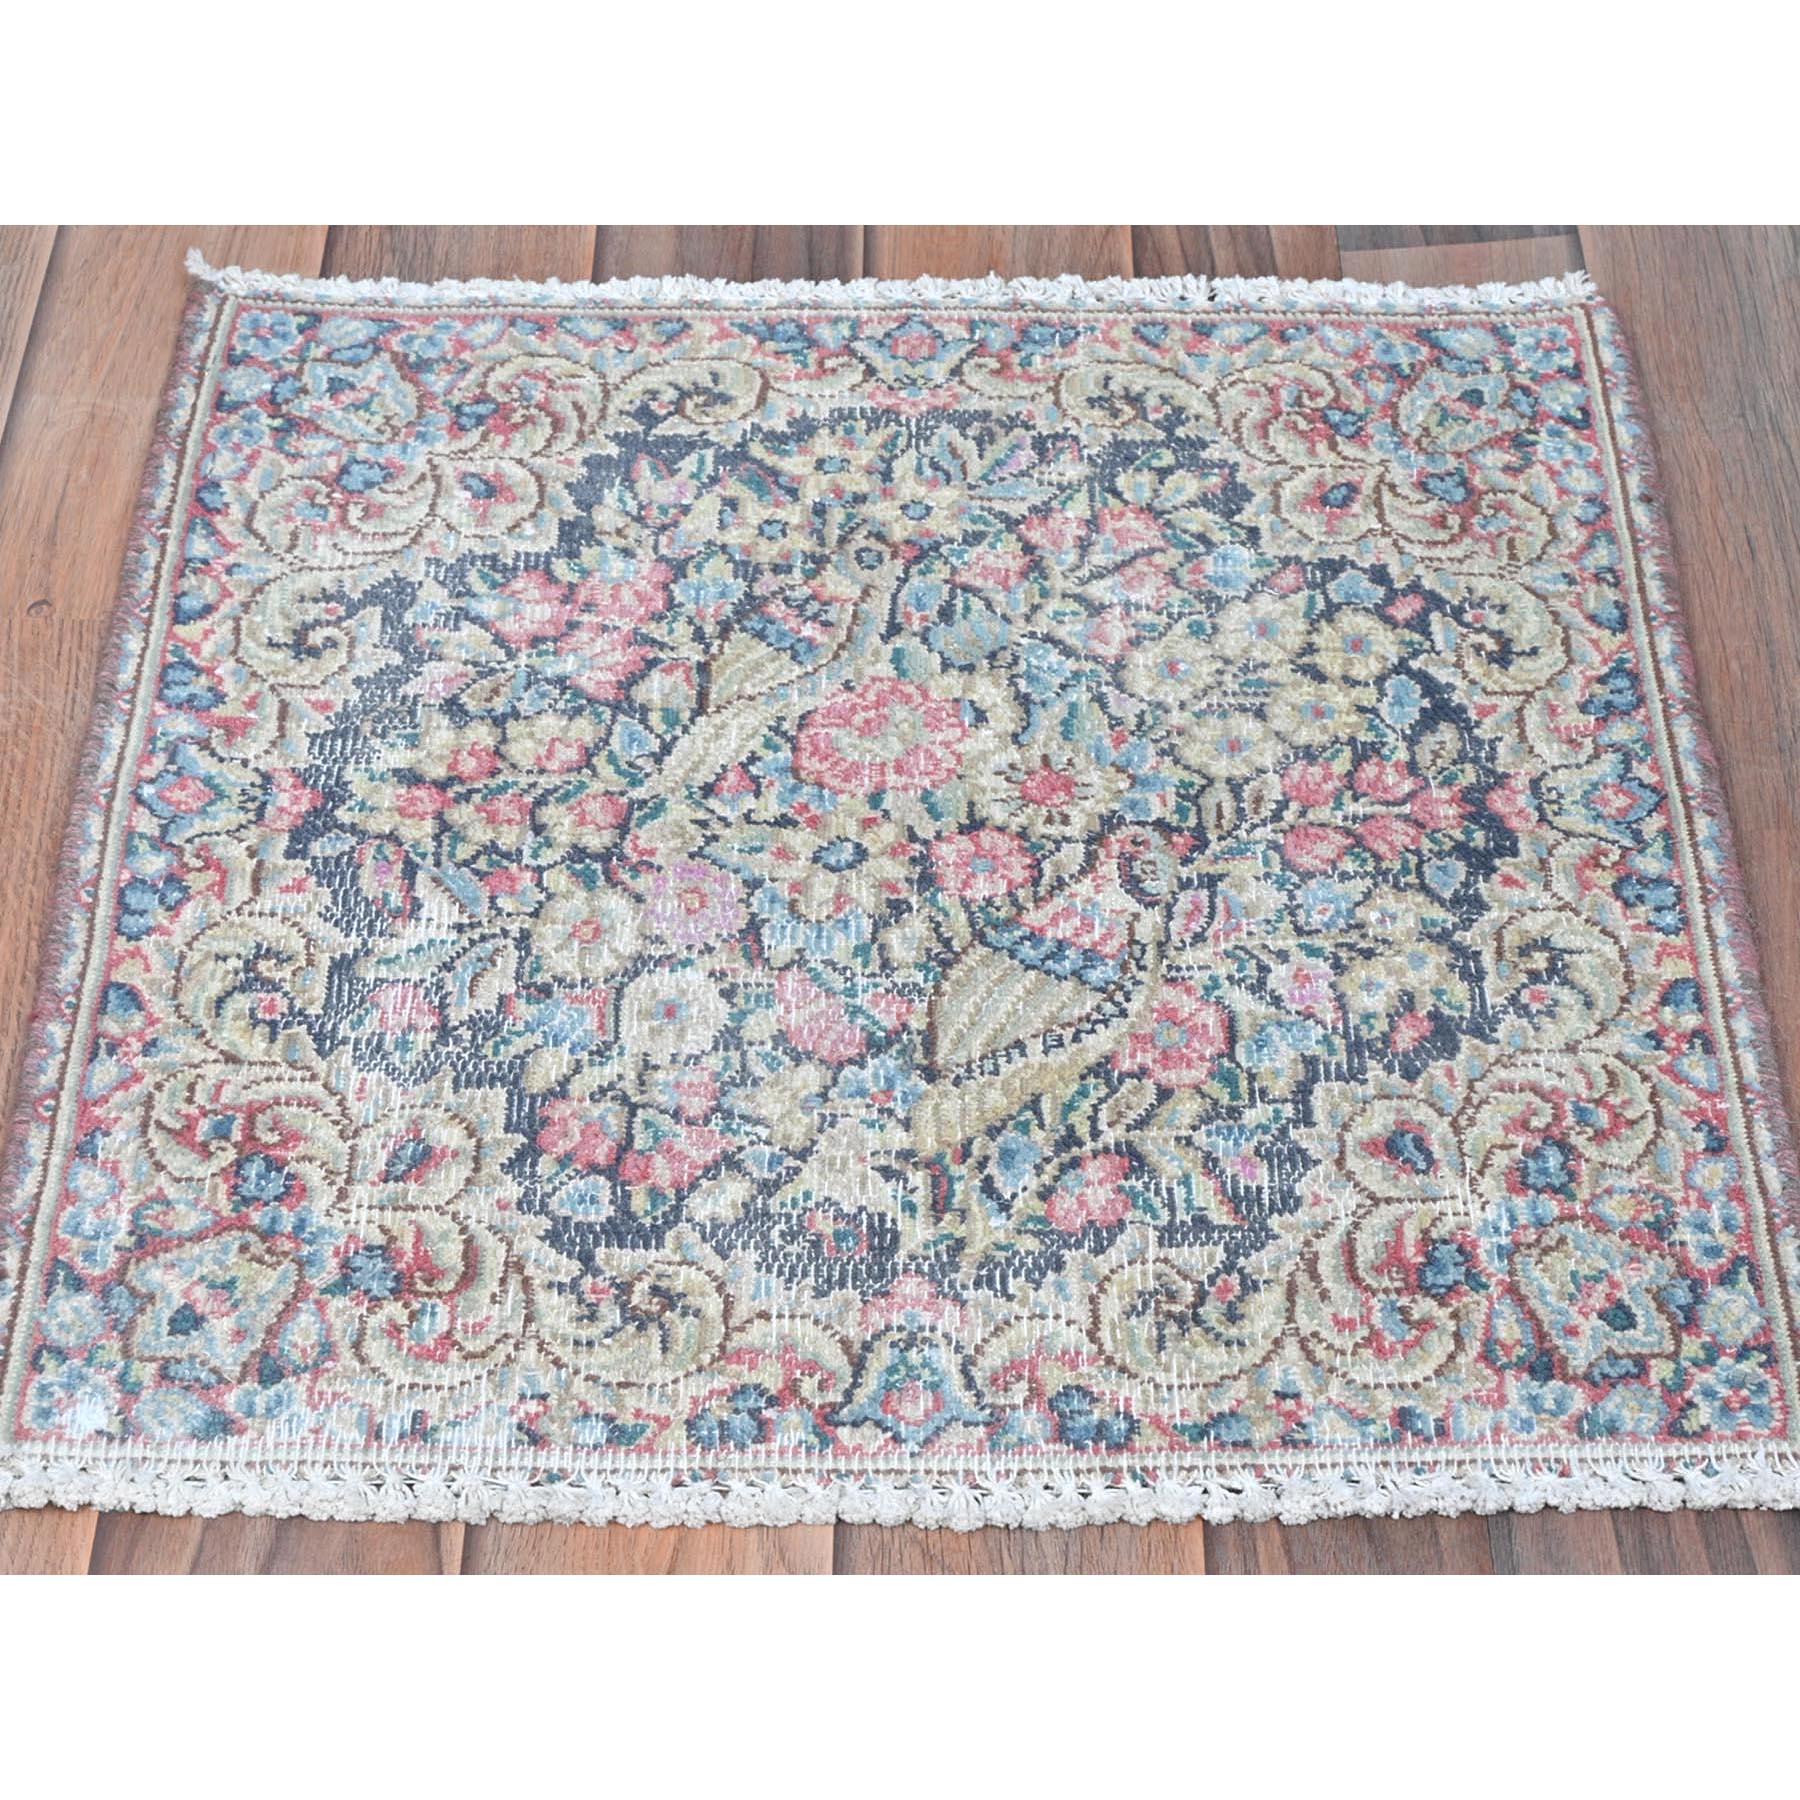 This fabulous hand-knotted carpet has been created and designed for extra strength and durability. This rug has been handcrafted for weeks in the traditional method that is used to make
Exact Rug Size in Feet and Inches : 1'8